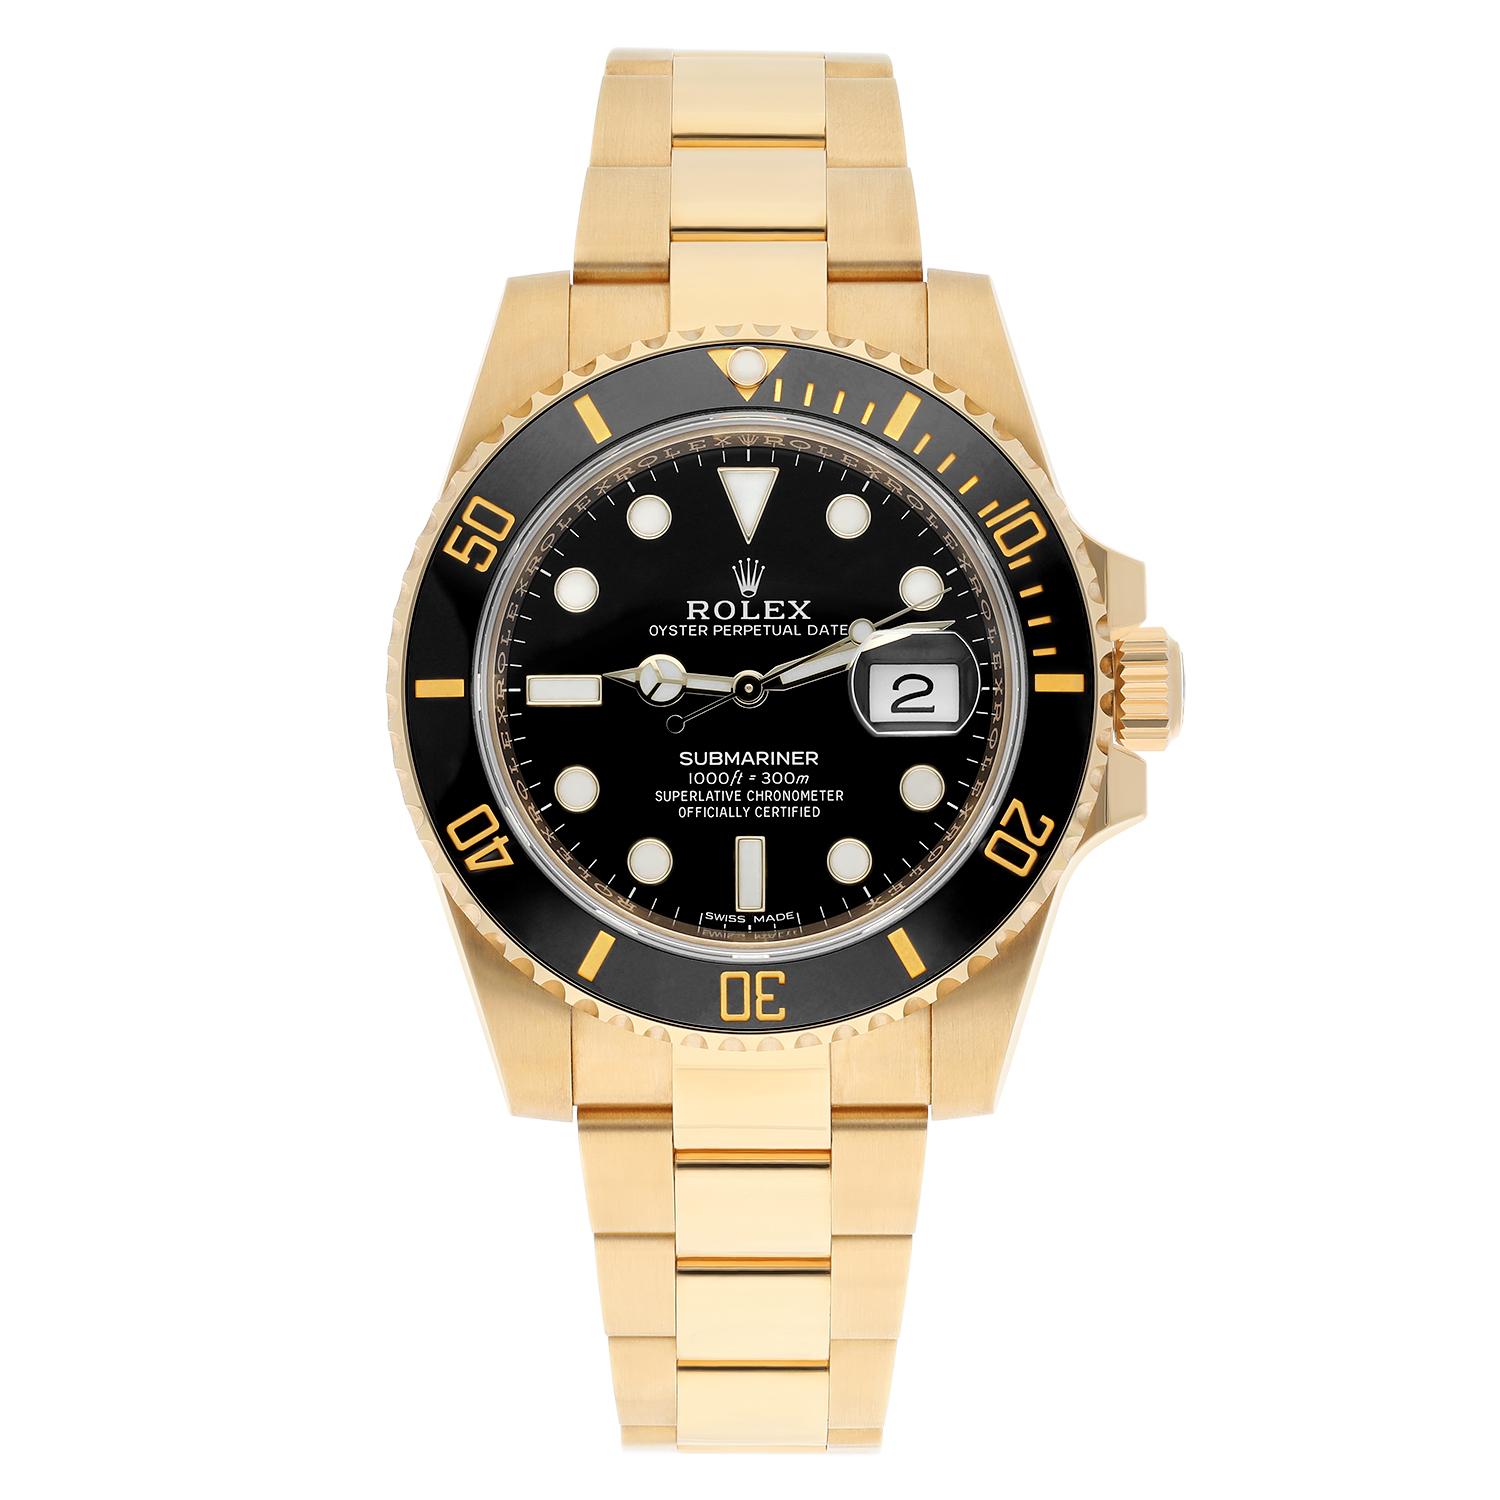 Never Worn Rolex Submariner Date Ceramic Bezel Yellow Gold Watch with Black Dial 116618LN.
Watch comes with original Rolex Box, Rolex Warranty Card Dated 2021 and Green Tag.
New without tags. “Unworn Watch, with minor scuffs due to store display.